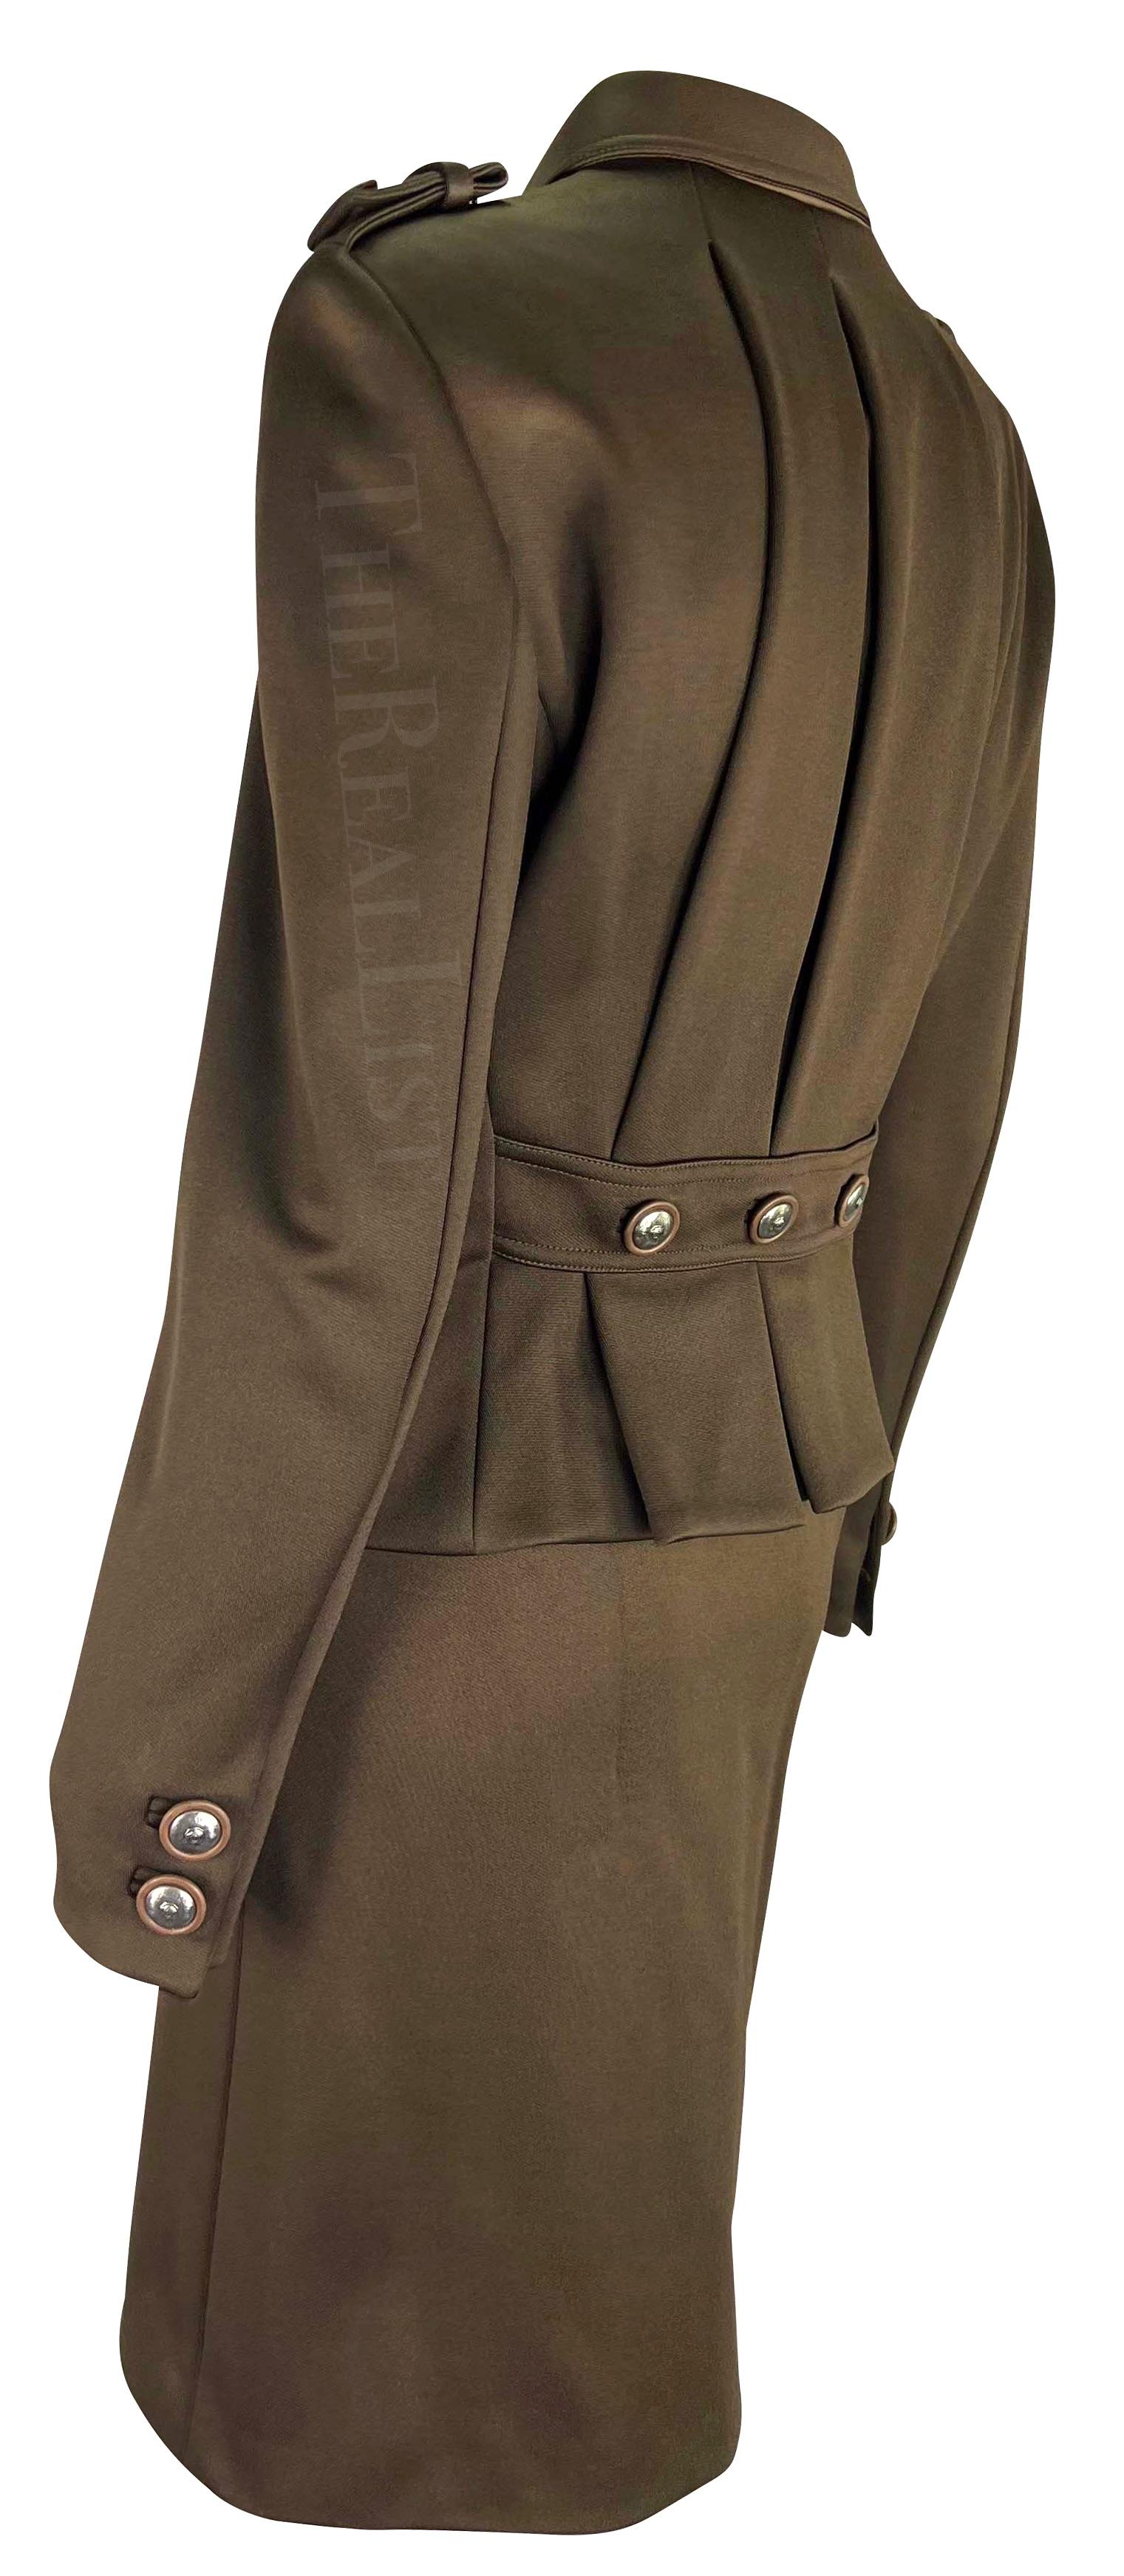 Presenting a fabulous brown Gianni Versace skirt suit, designed by Gianni Versace. From the Fall/Winter 1996 collection, this ensemble combines chic sophistication with military-inspired flair, featuring a tailored jacket and matching skirt. The